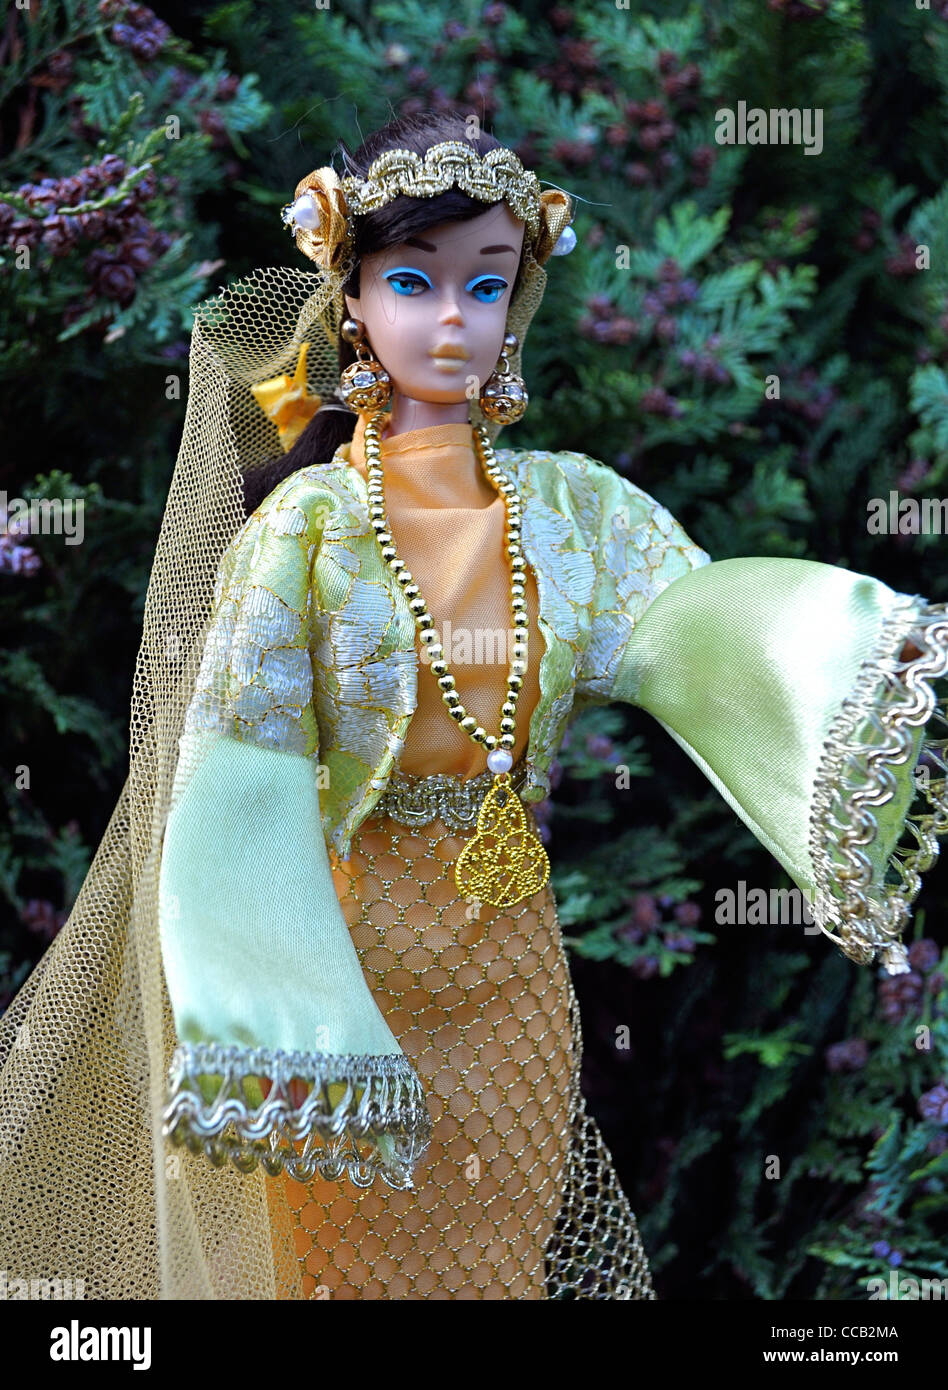 Vintage 1963 brunette swirl ponytail Barbie doll Syria costume, Syrian national costume, traditional Middle Eastern clothing. Stock Photo